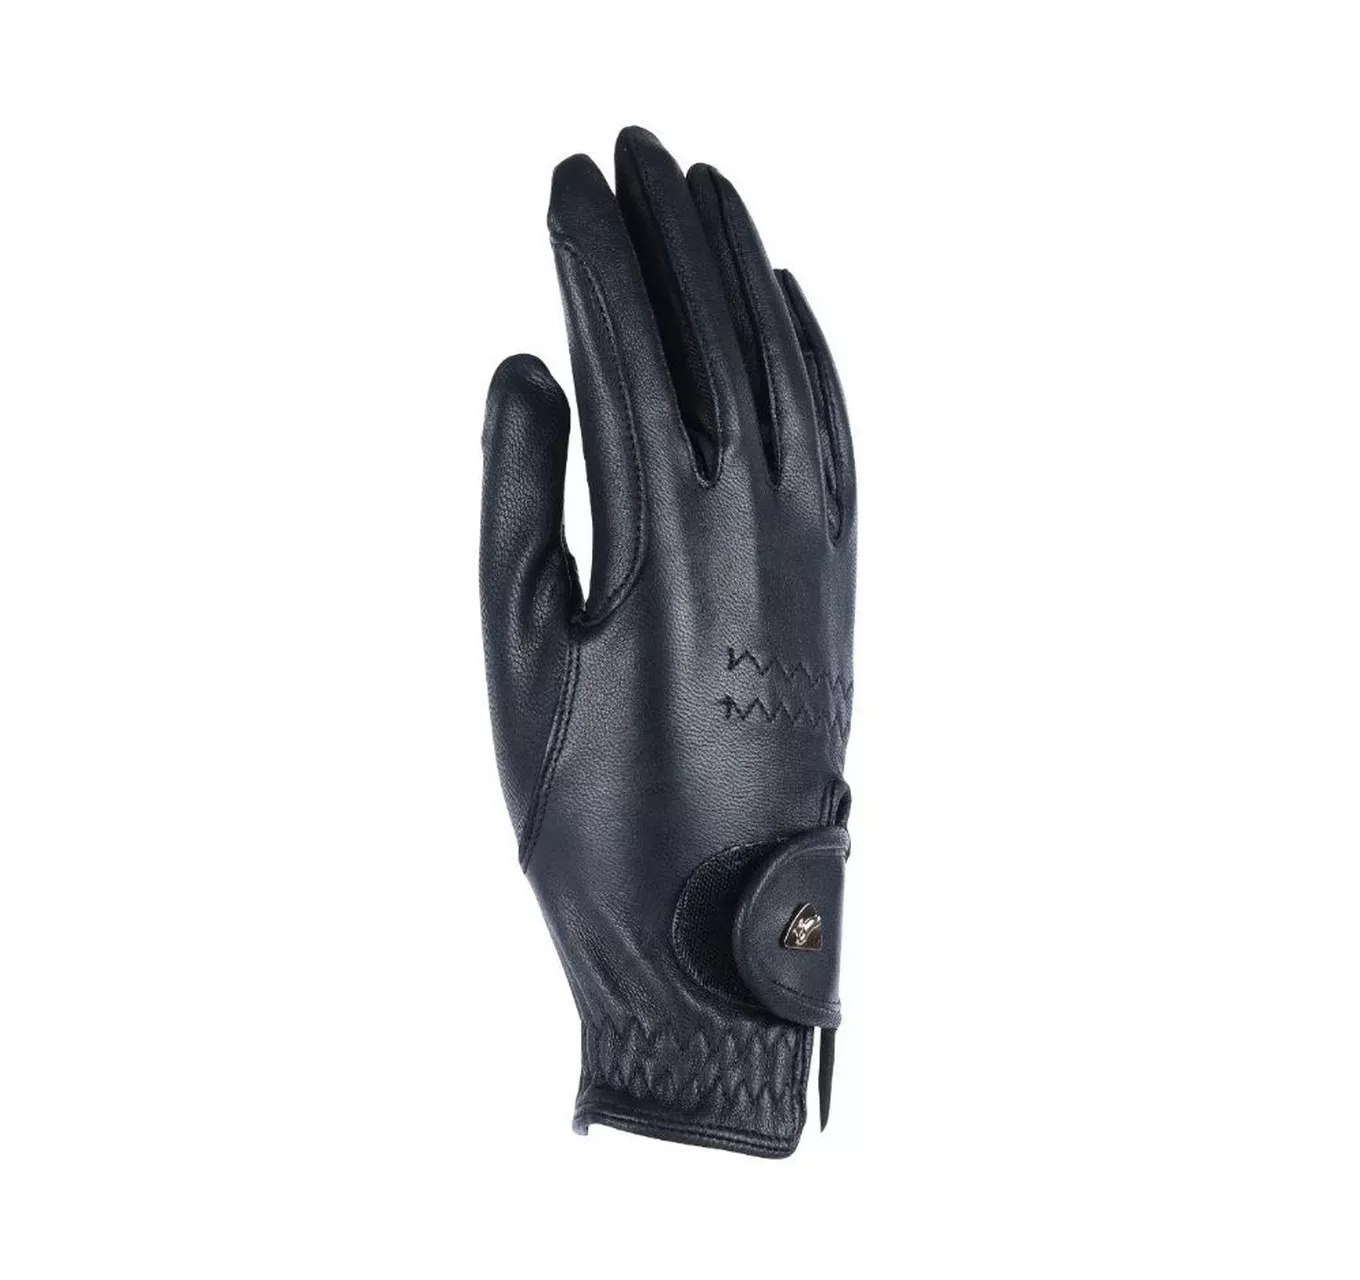 Leather Riding Gloves Black XL